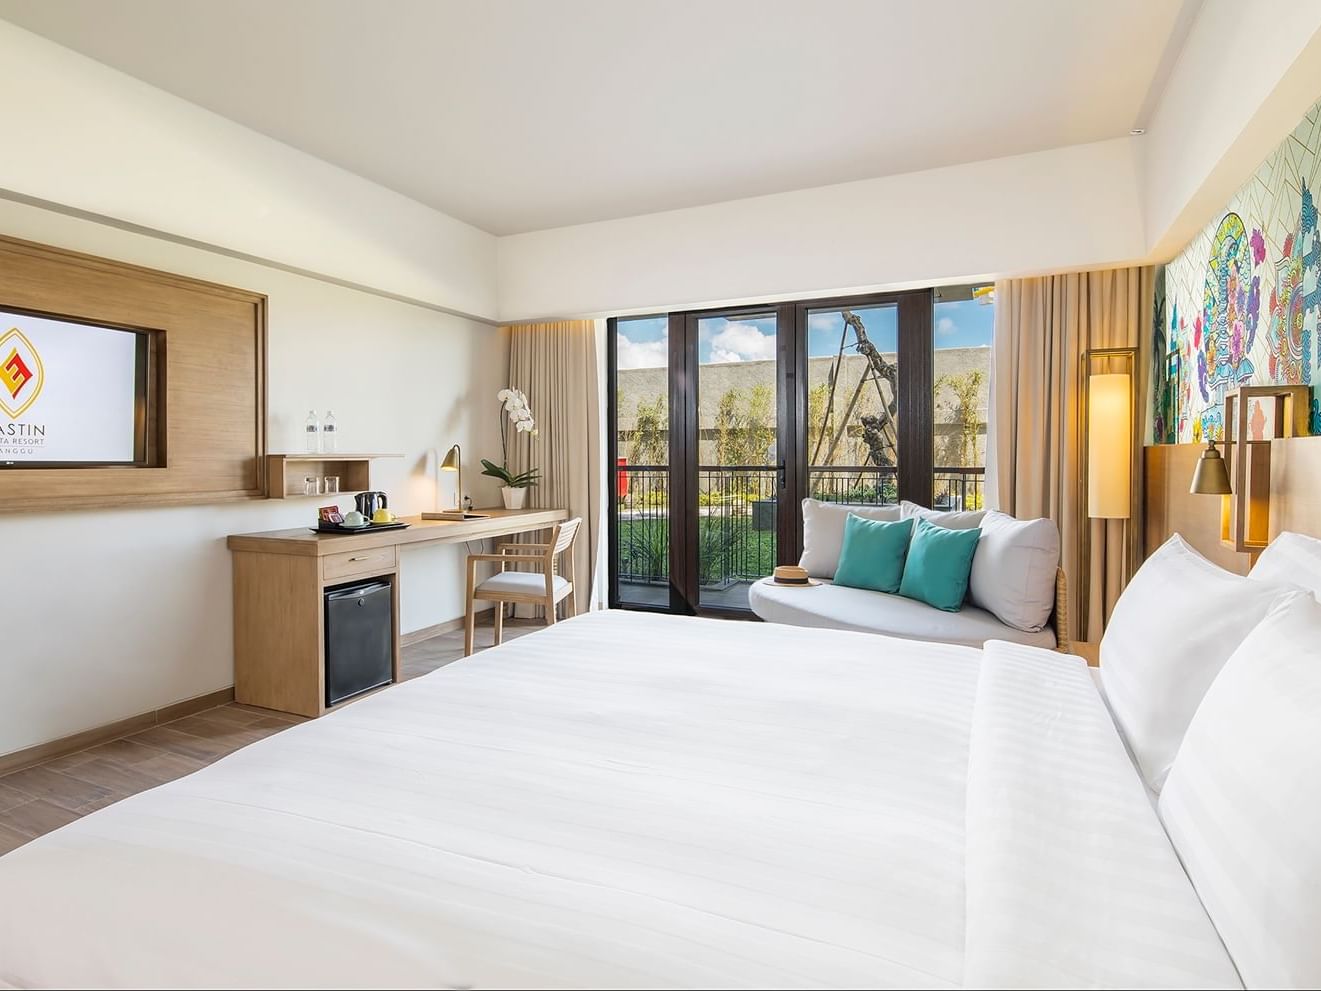 Deluxe Room with a comfy bed and TV area at Eastin Ashta Resort Canggu